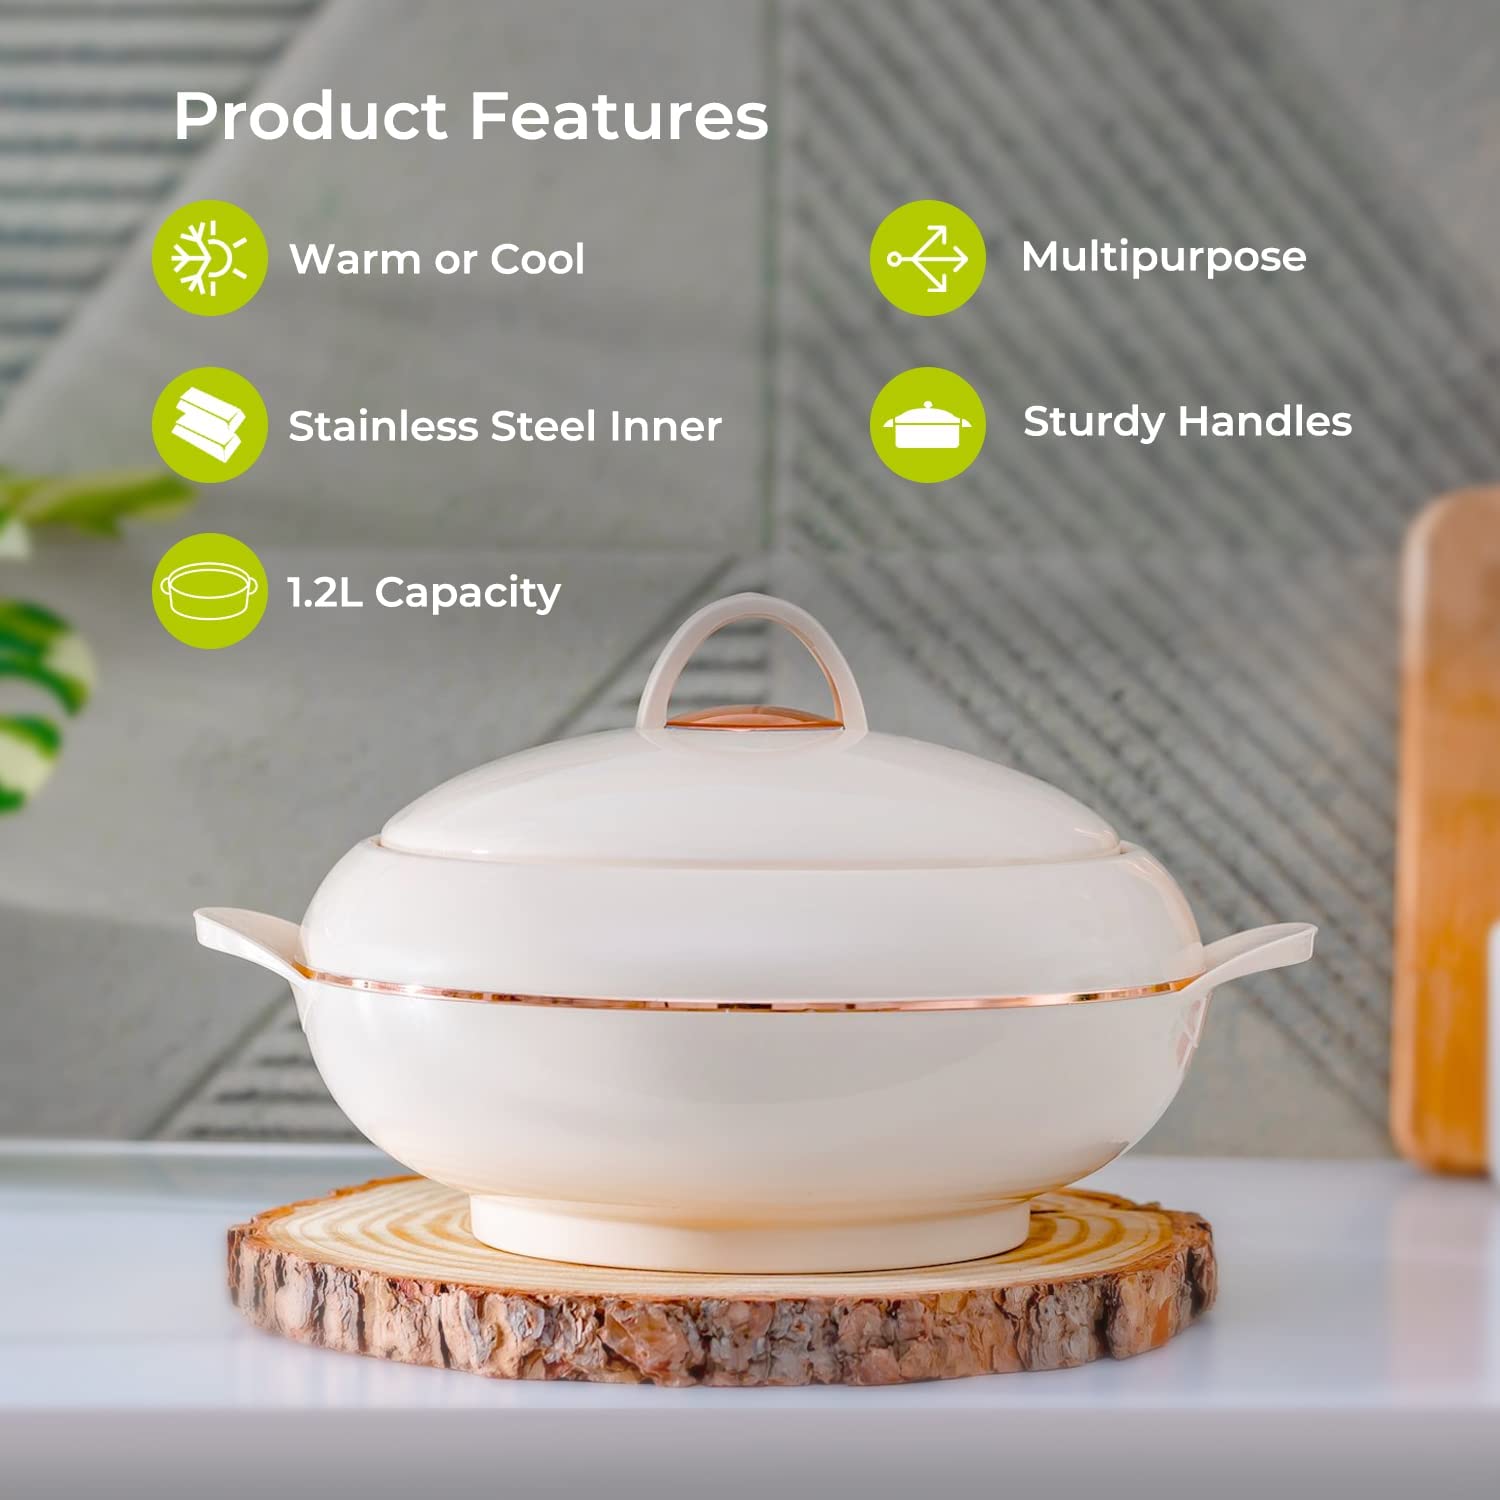 the 1.2l casserole dish features five main different features such as keeping food warm and cool. Multipurpose usage. Stainless steel inner design. Sturdy handles. 1.2L capacity.